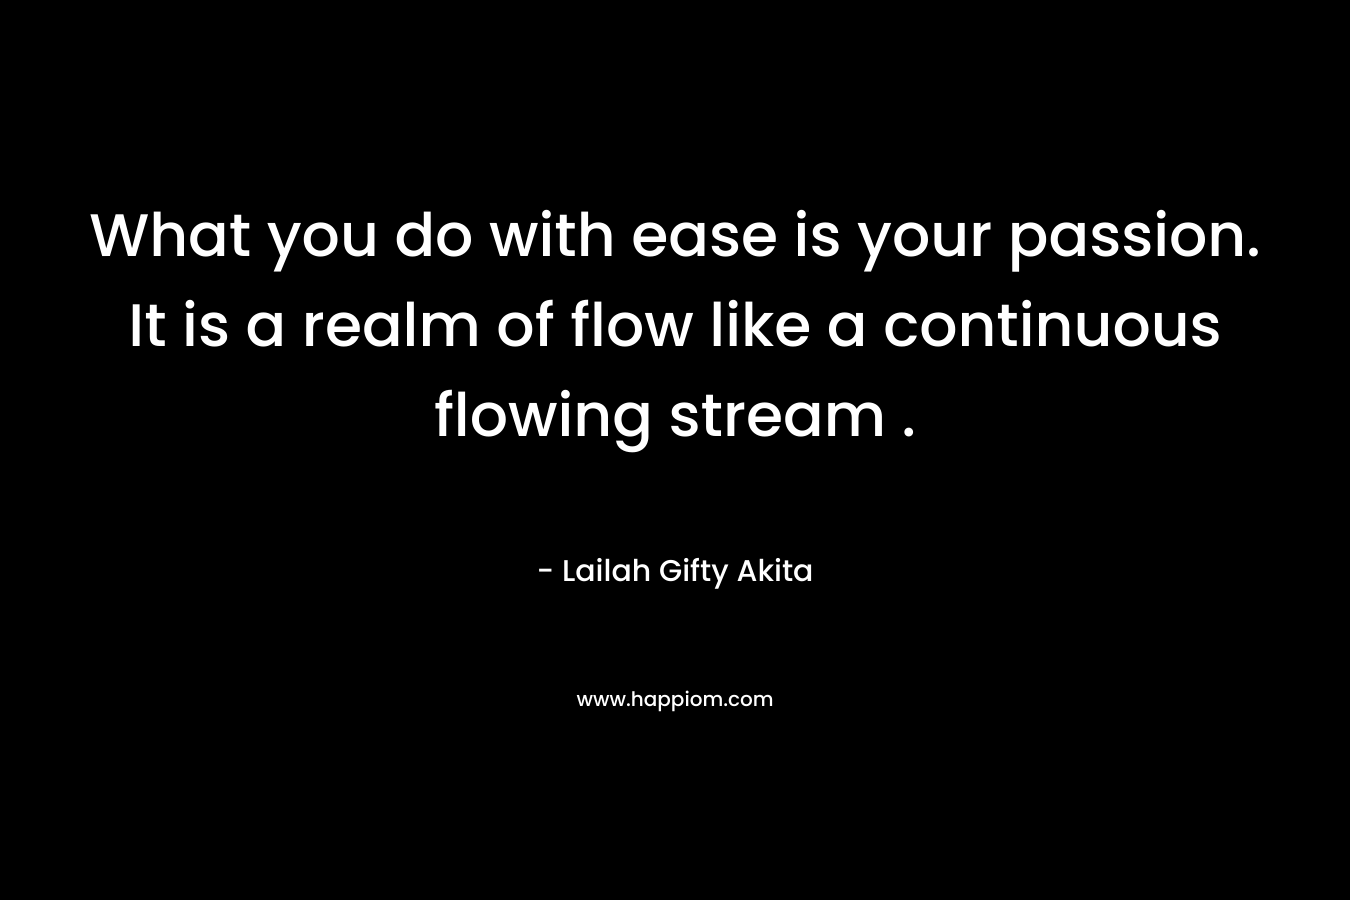 What you do with ease is your passion. It is a realm of flow like a continuous flowing stream .